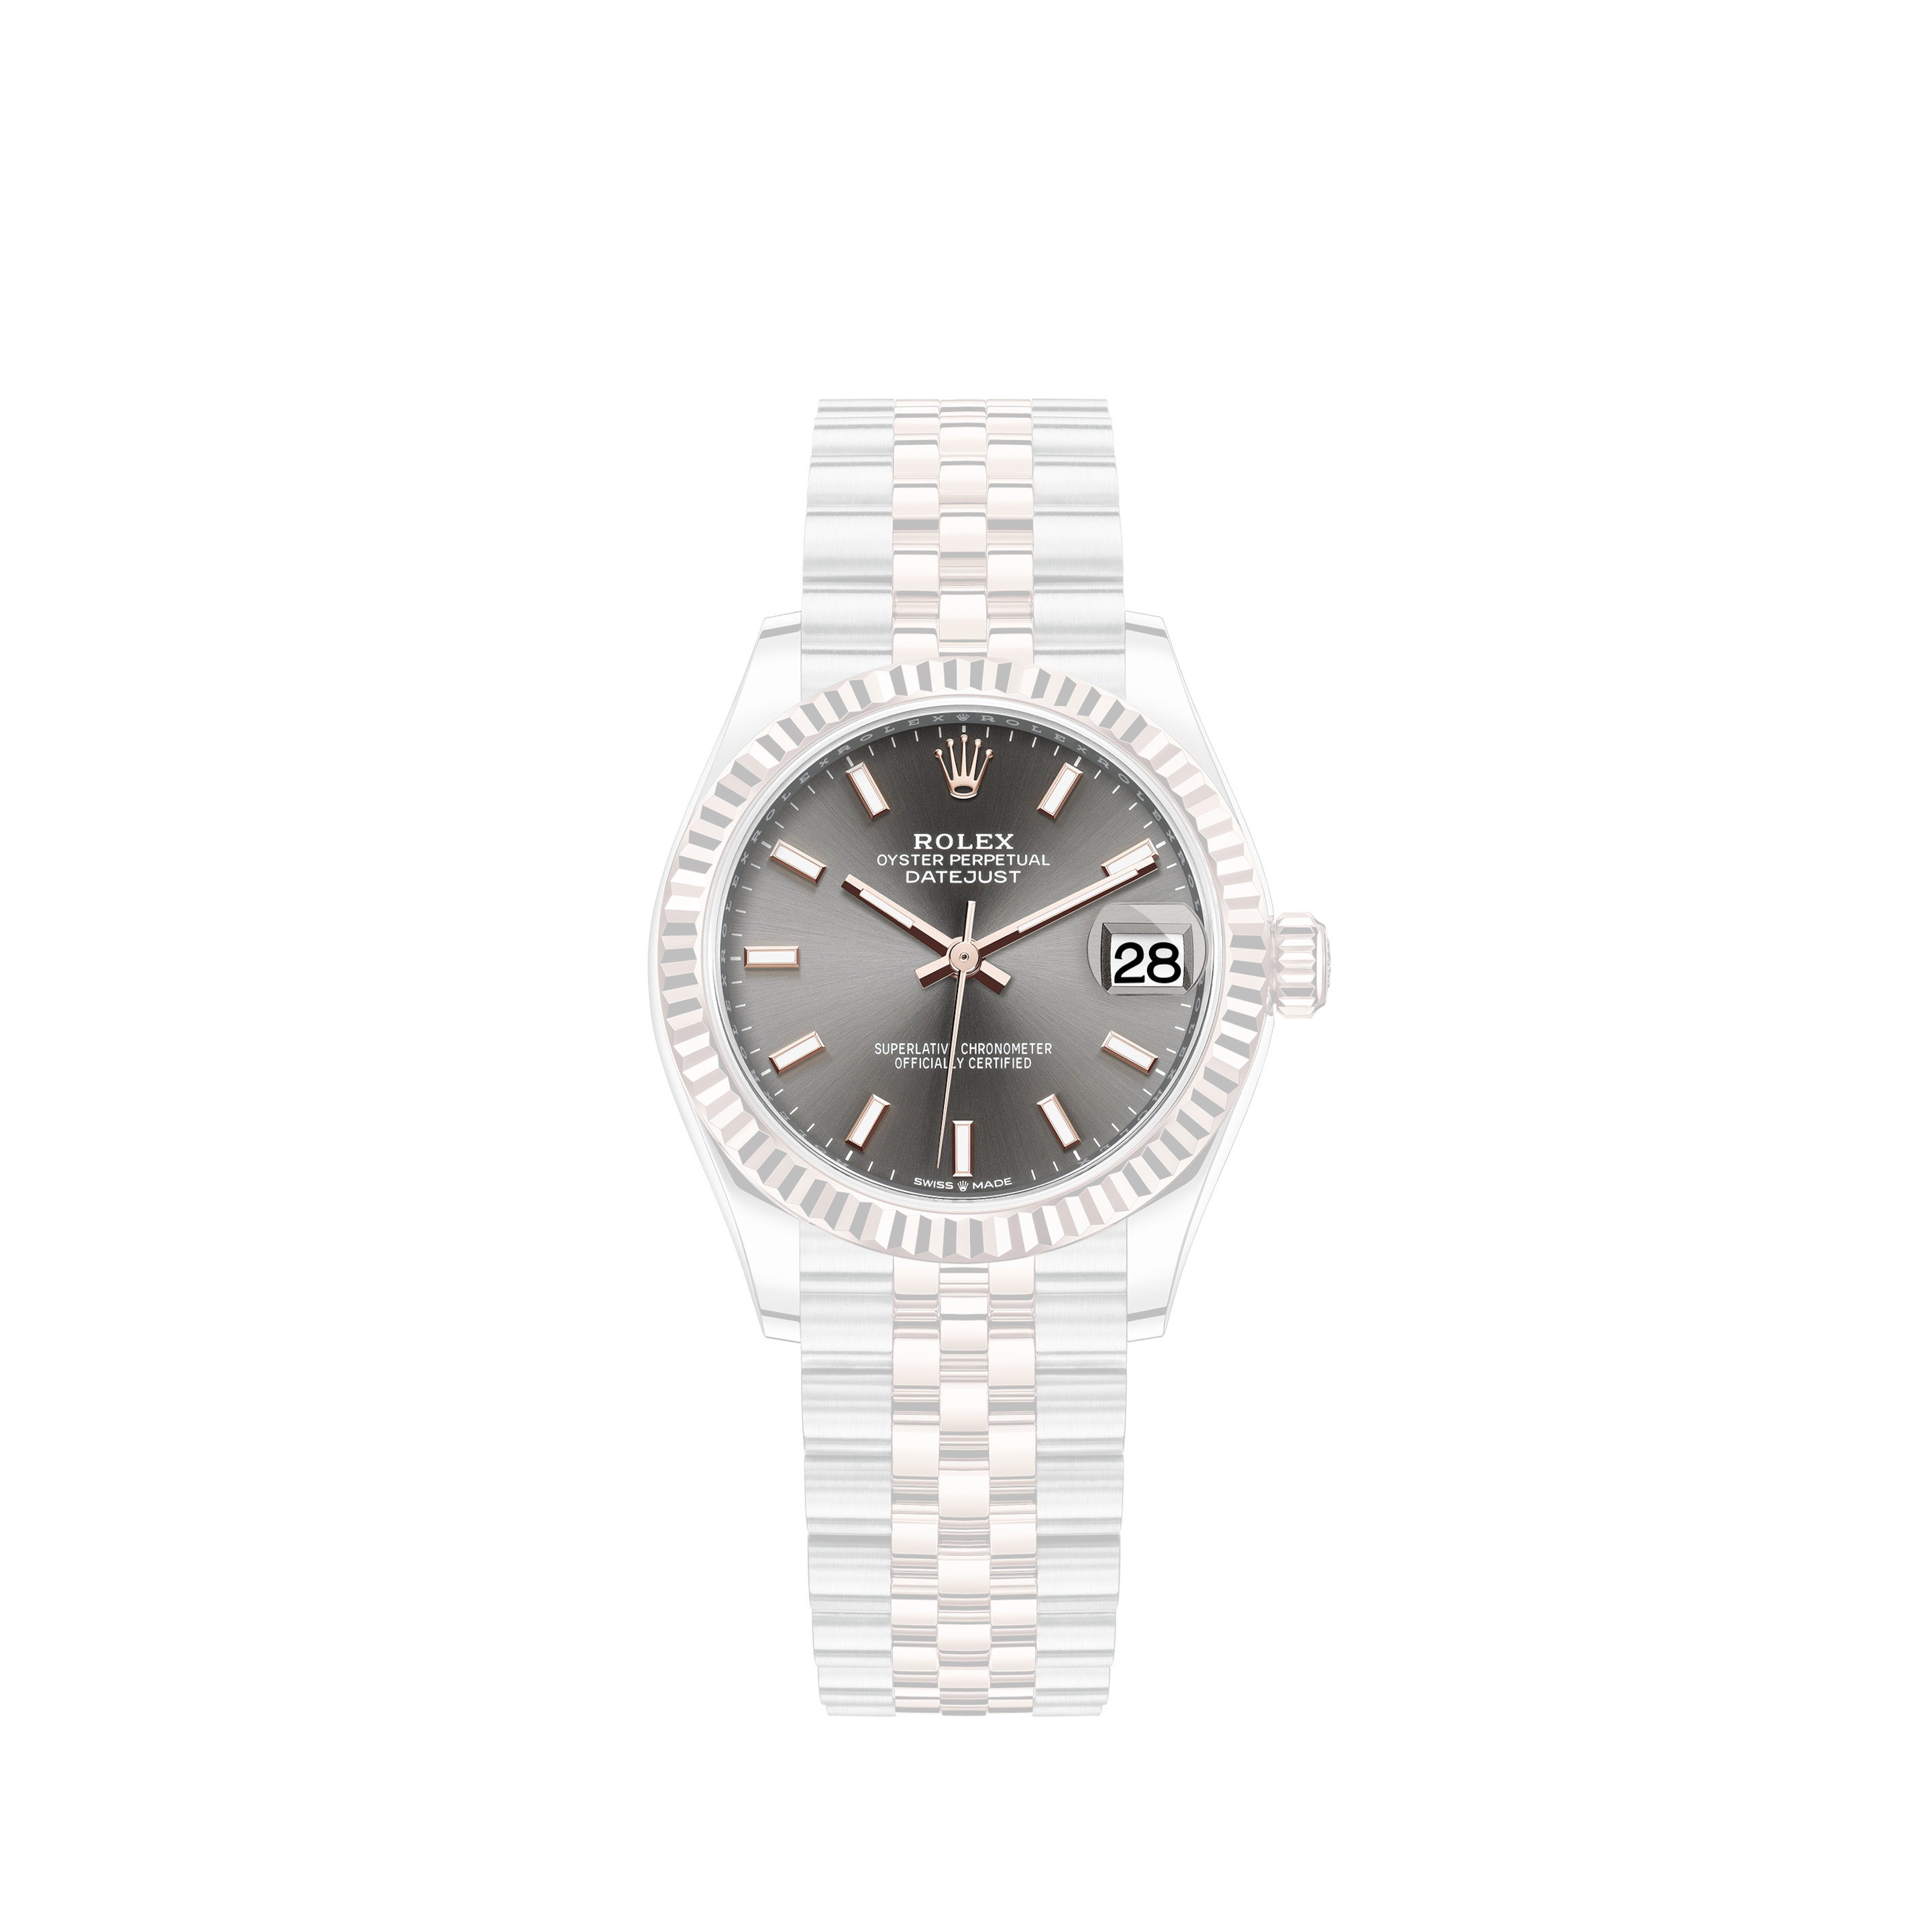 Rolex Oyster Perpetual Datejust 36mm Two Row Diamond Dial in Silver Color Stainless Steel Watch